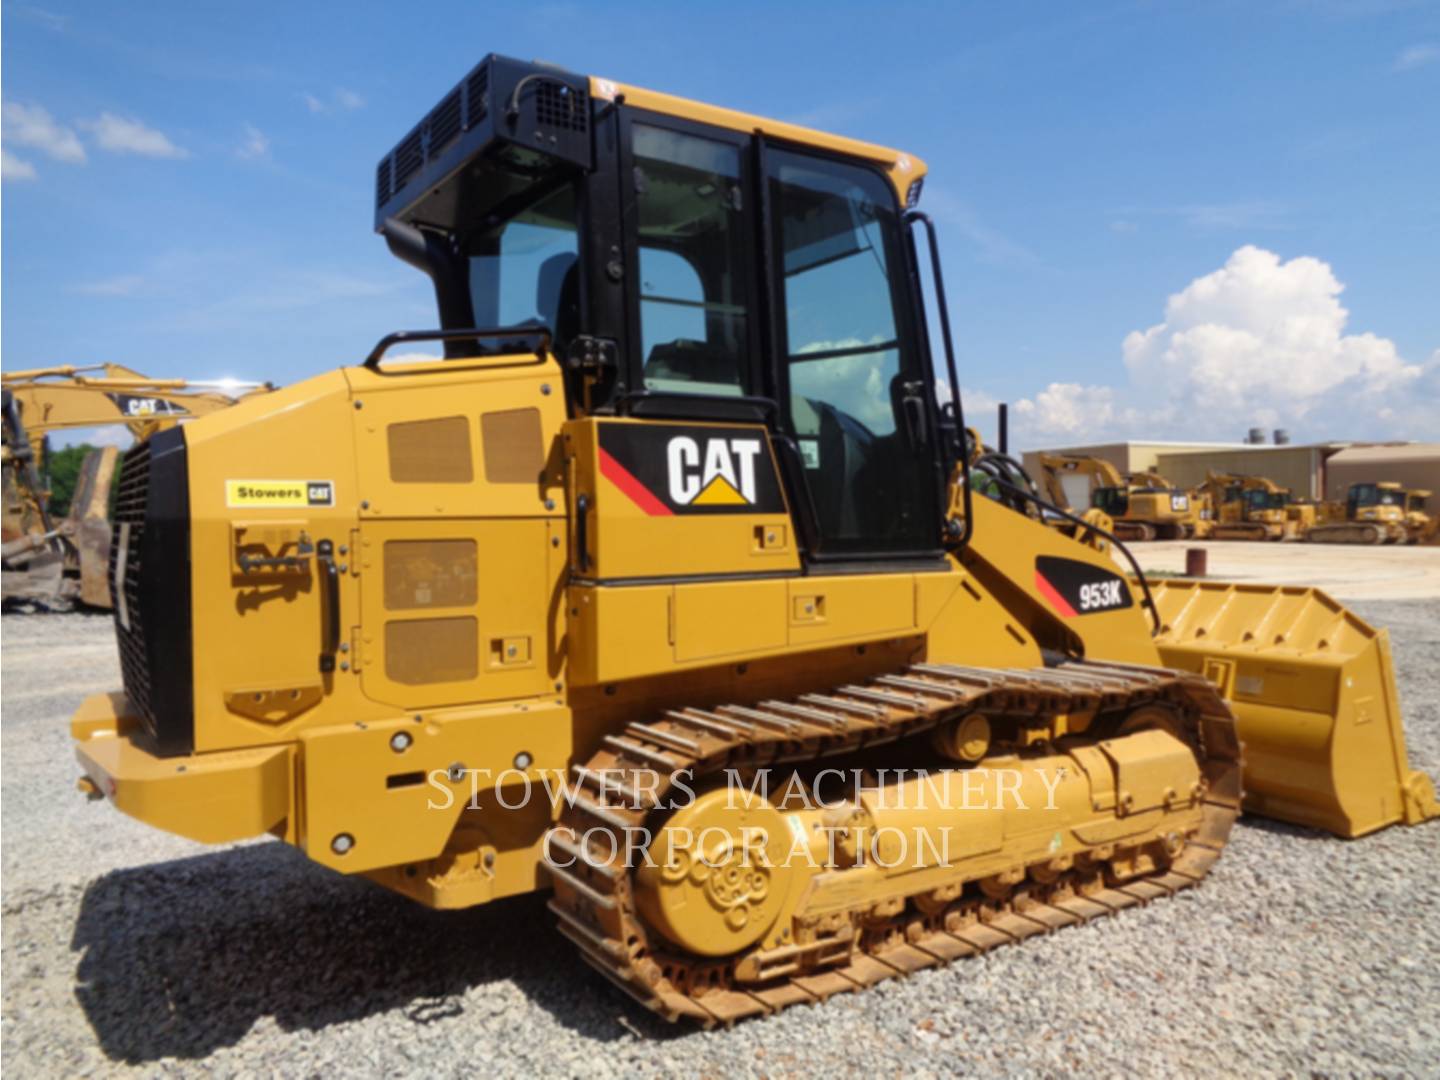 2017 Caterpillar 953K Compact Track Loader for sale in KNOXVILLE, TN ...